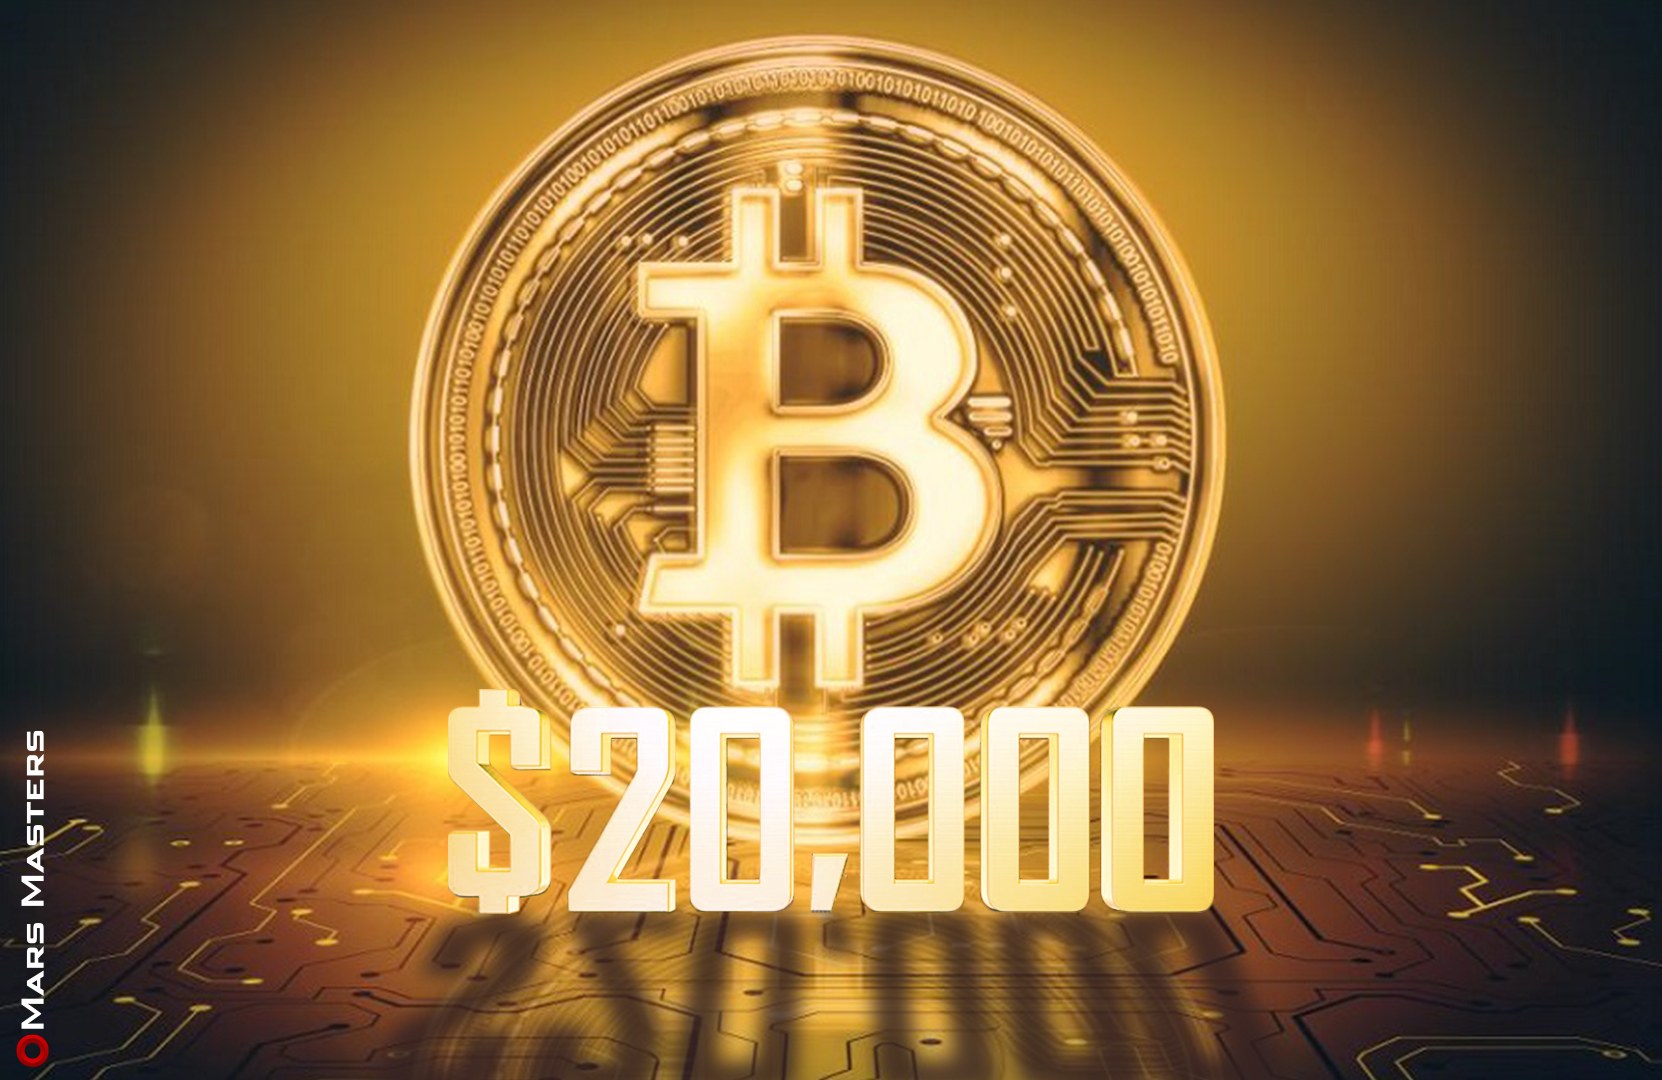 Bitcoin price hits $20,000 for the first time in history